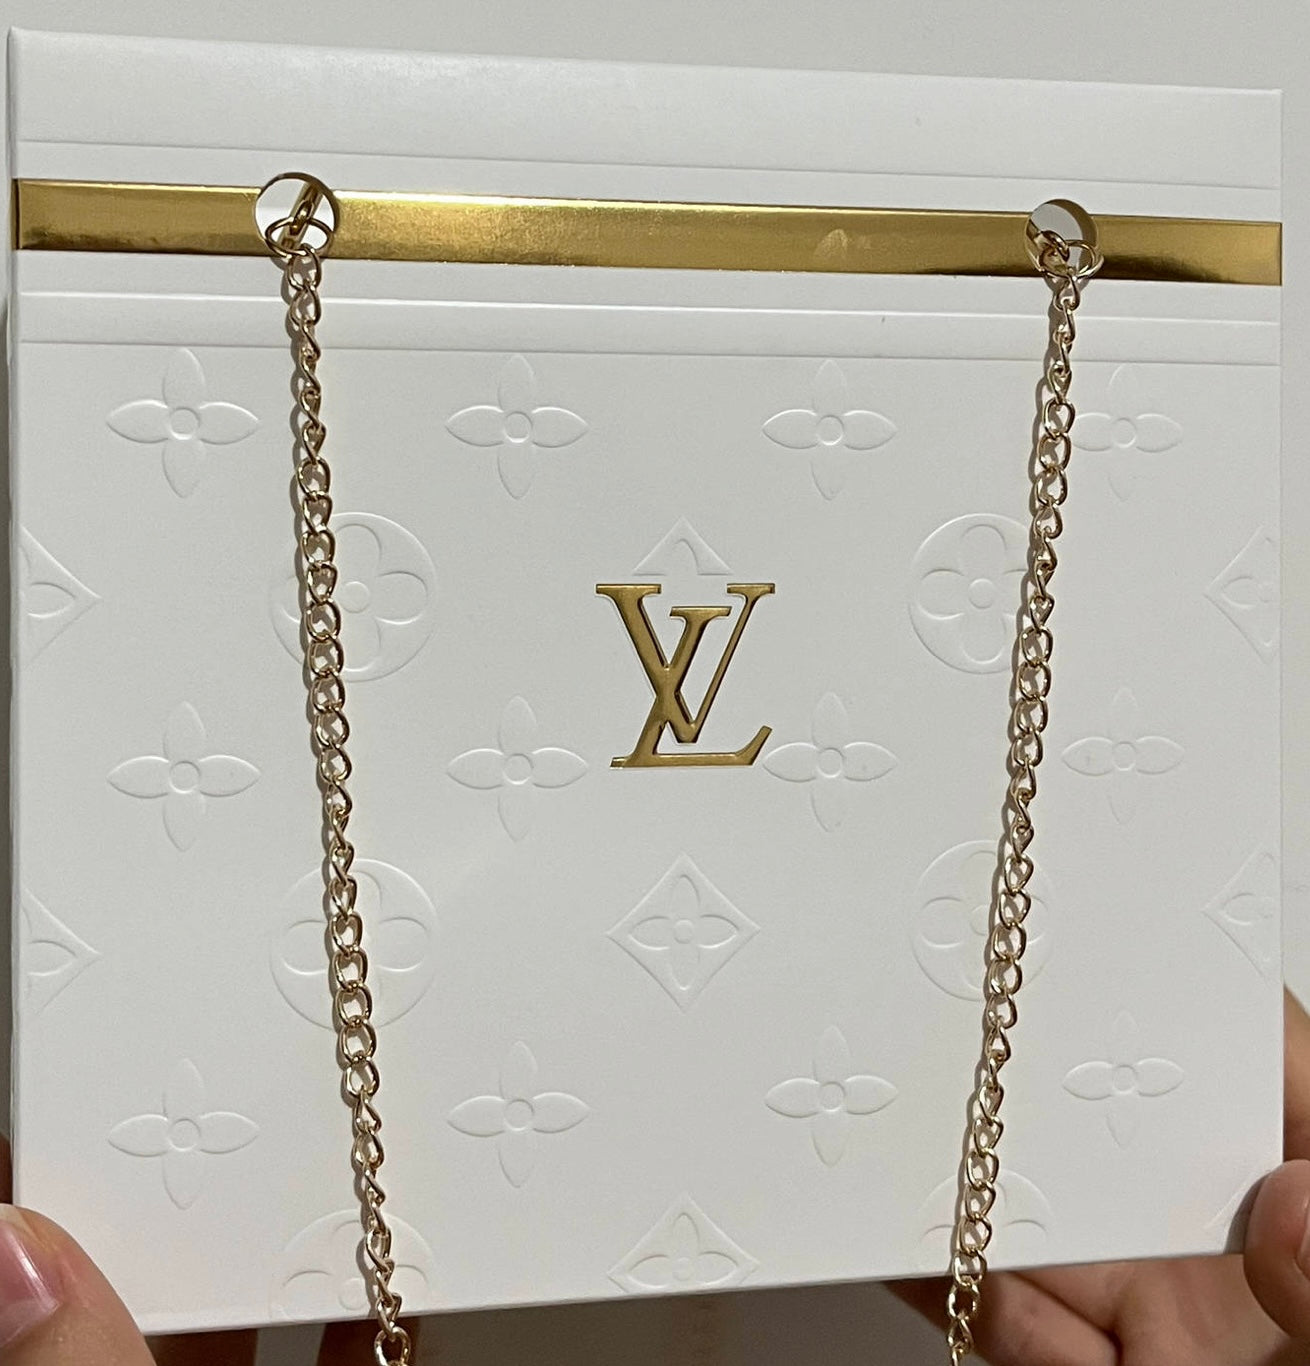 Branded L V Box with Chain...